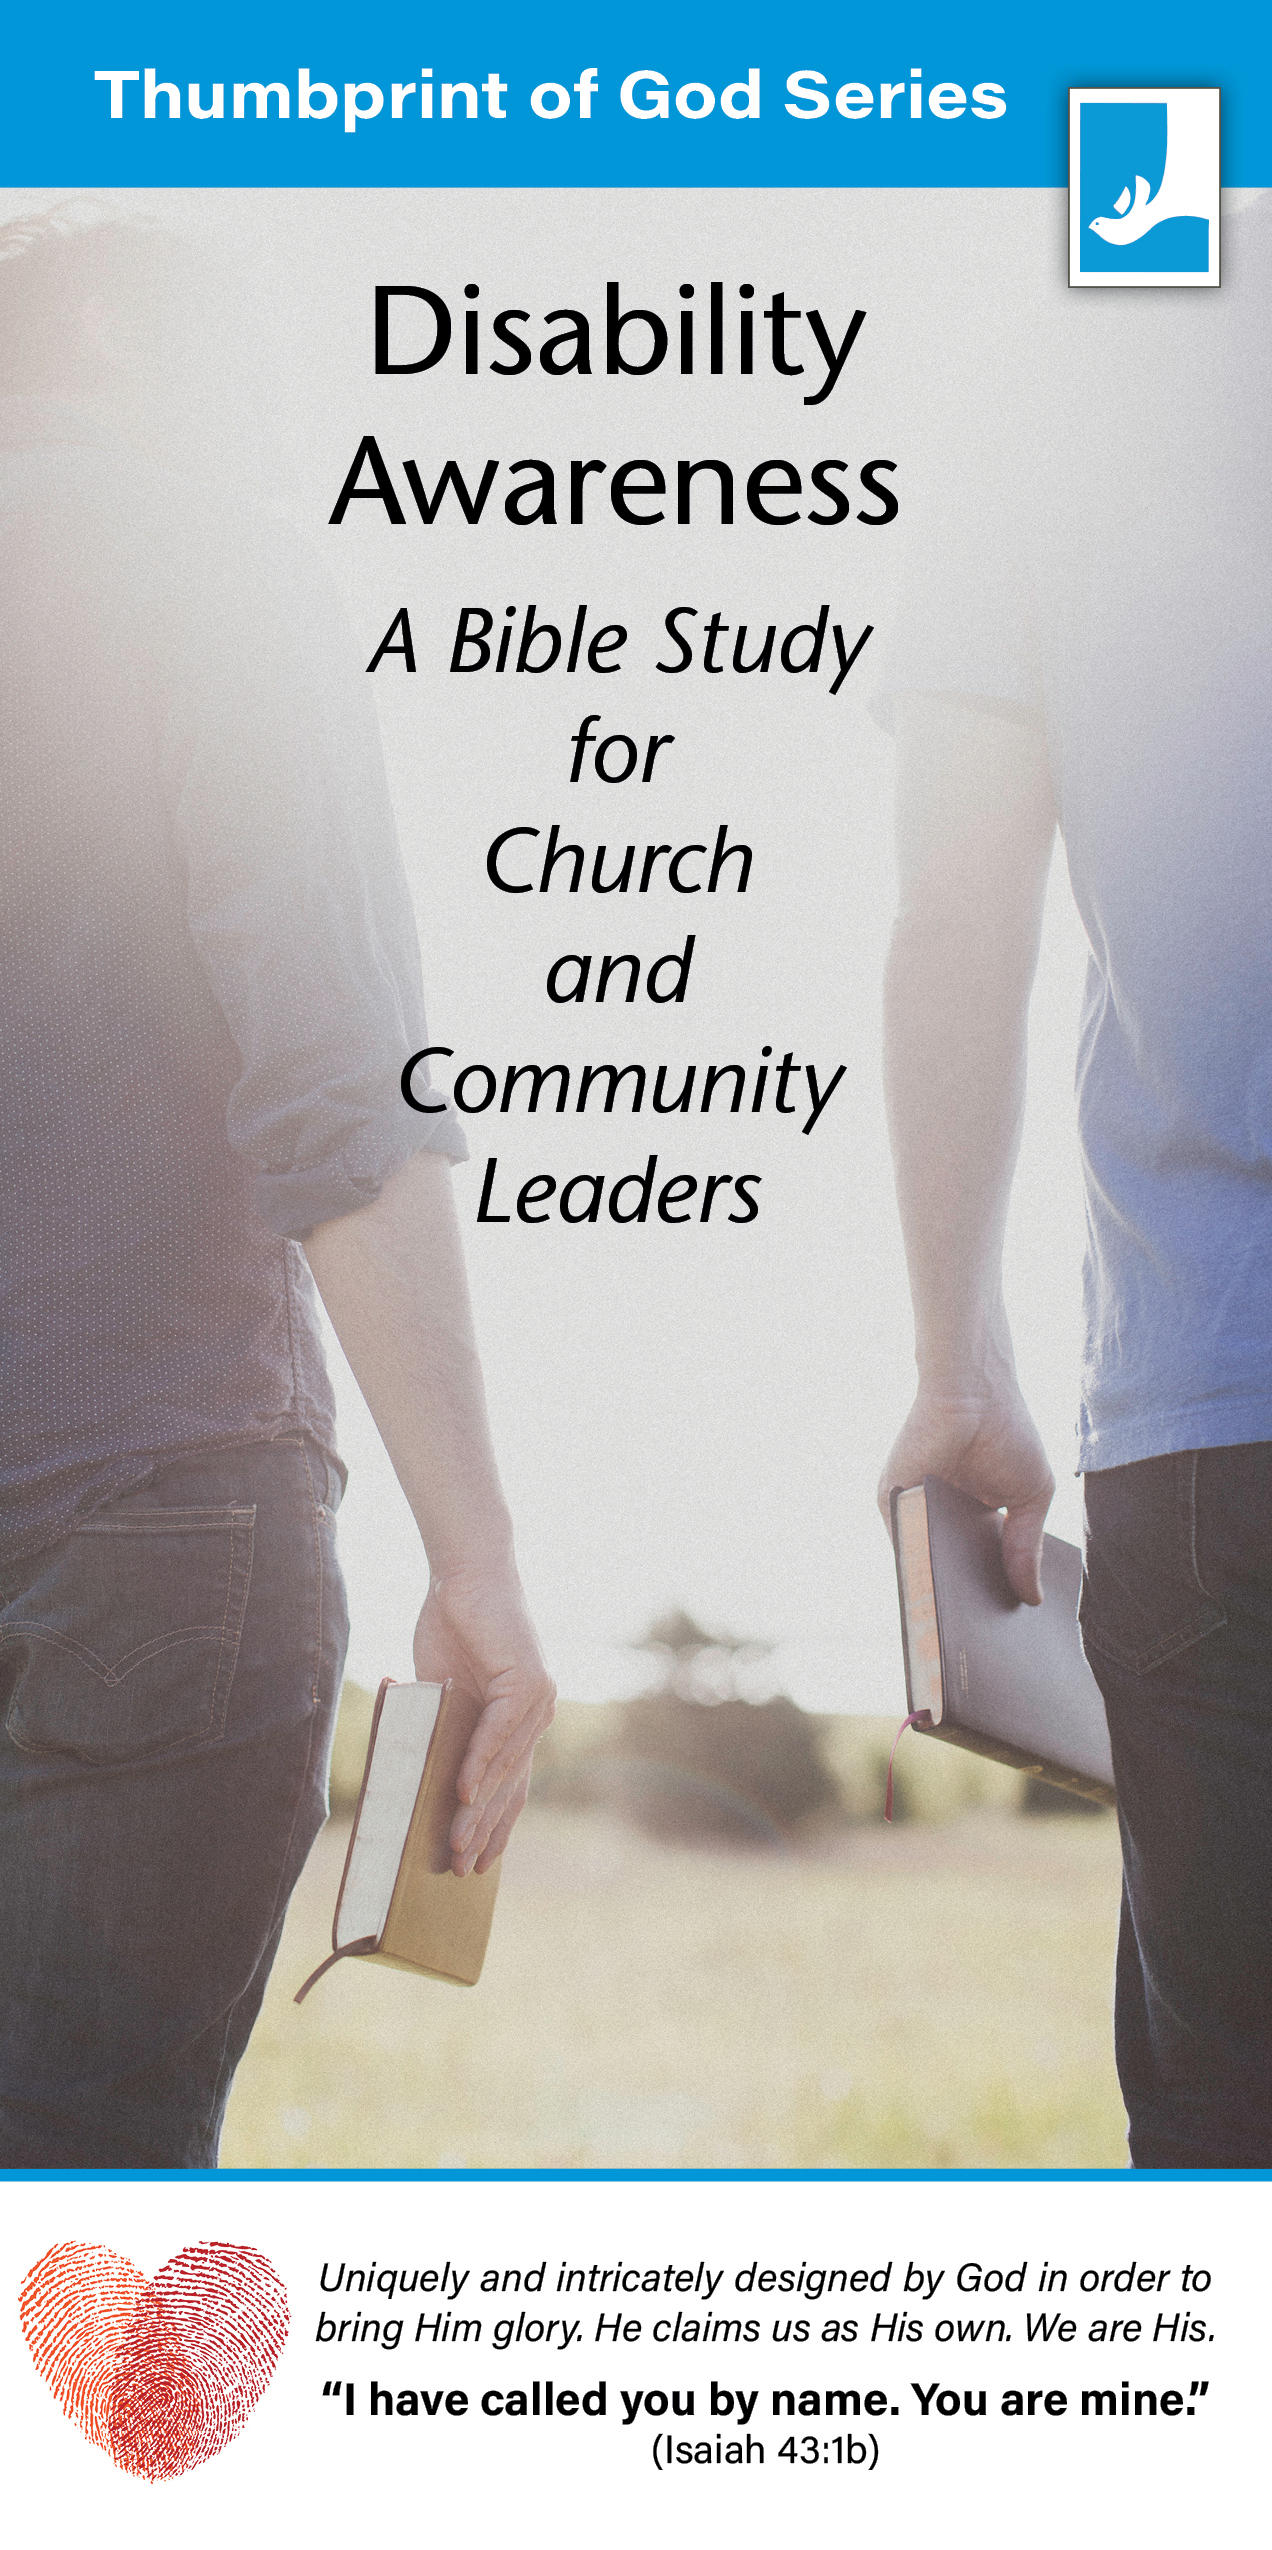 Disability Awareness - A Bible Study for Church and Community Leaders